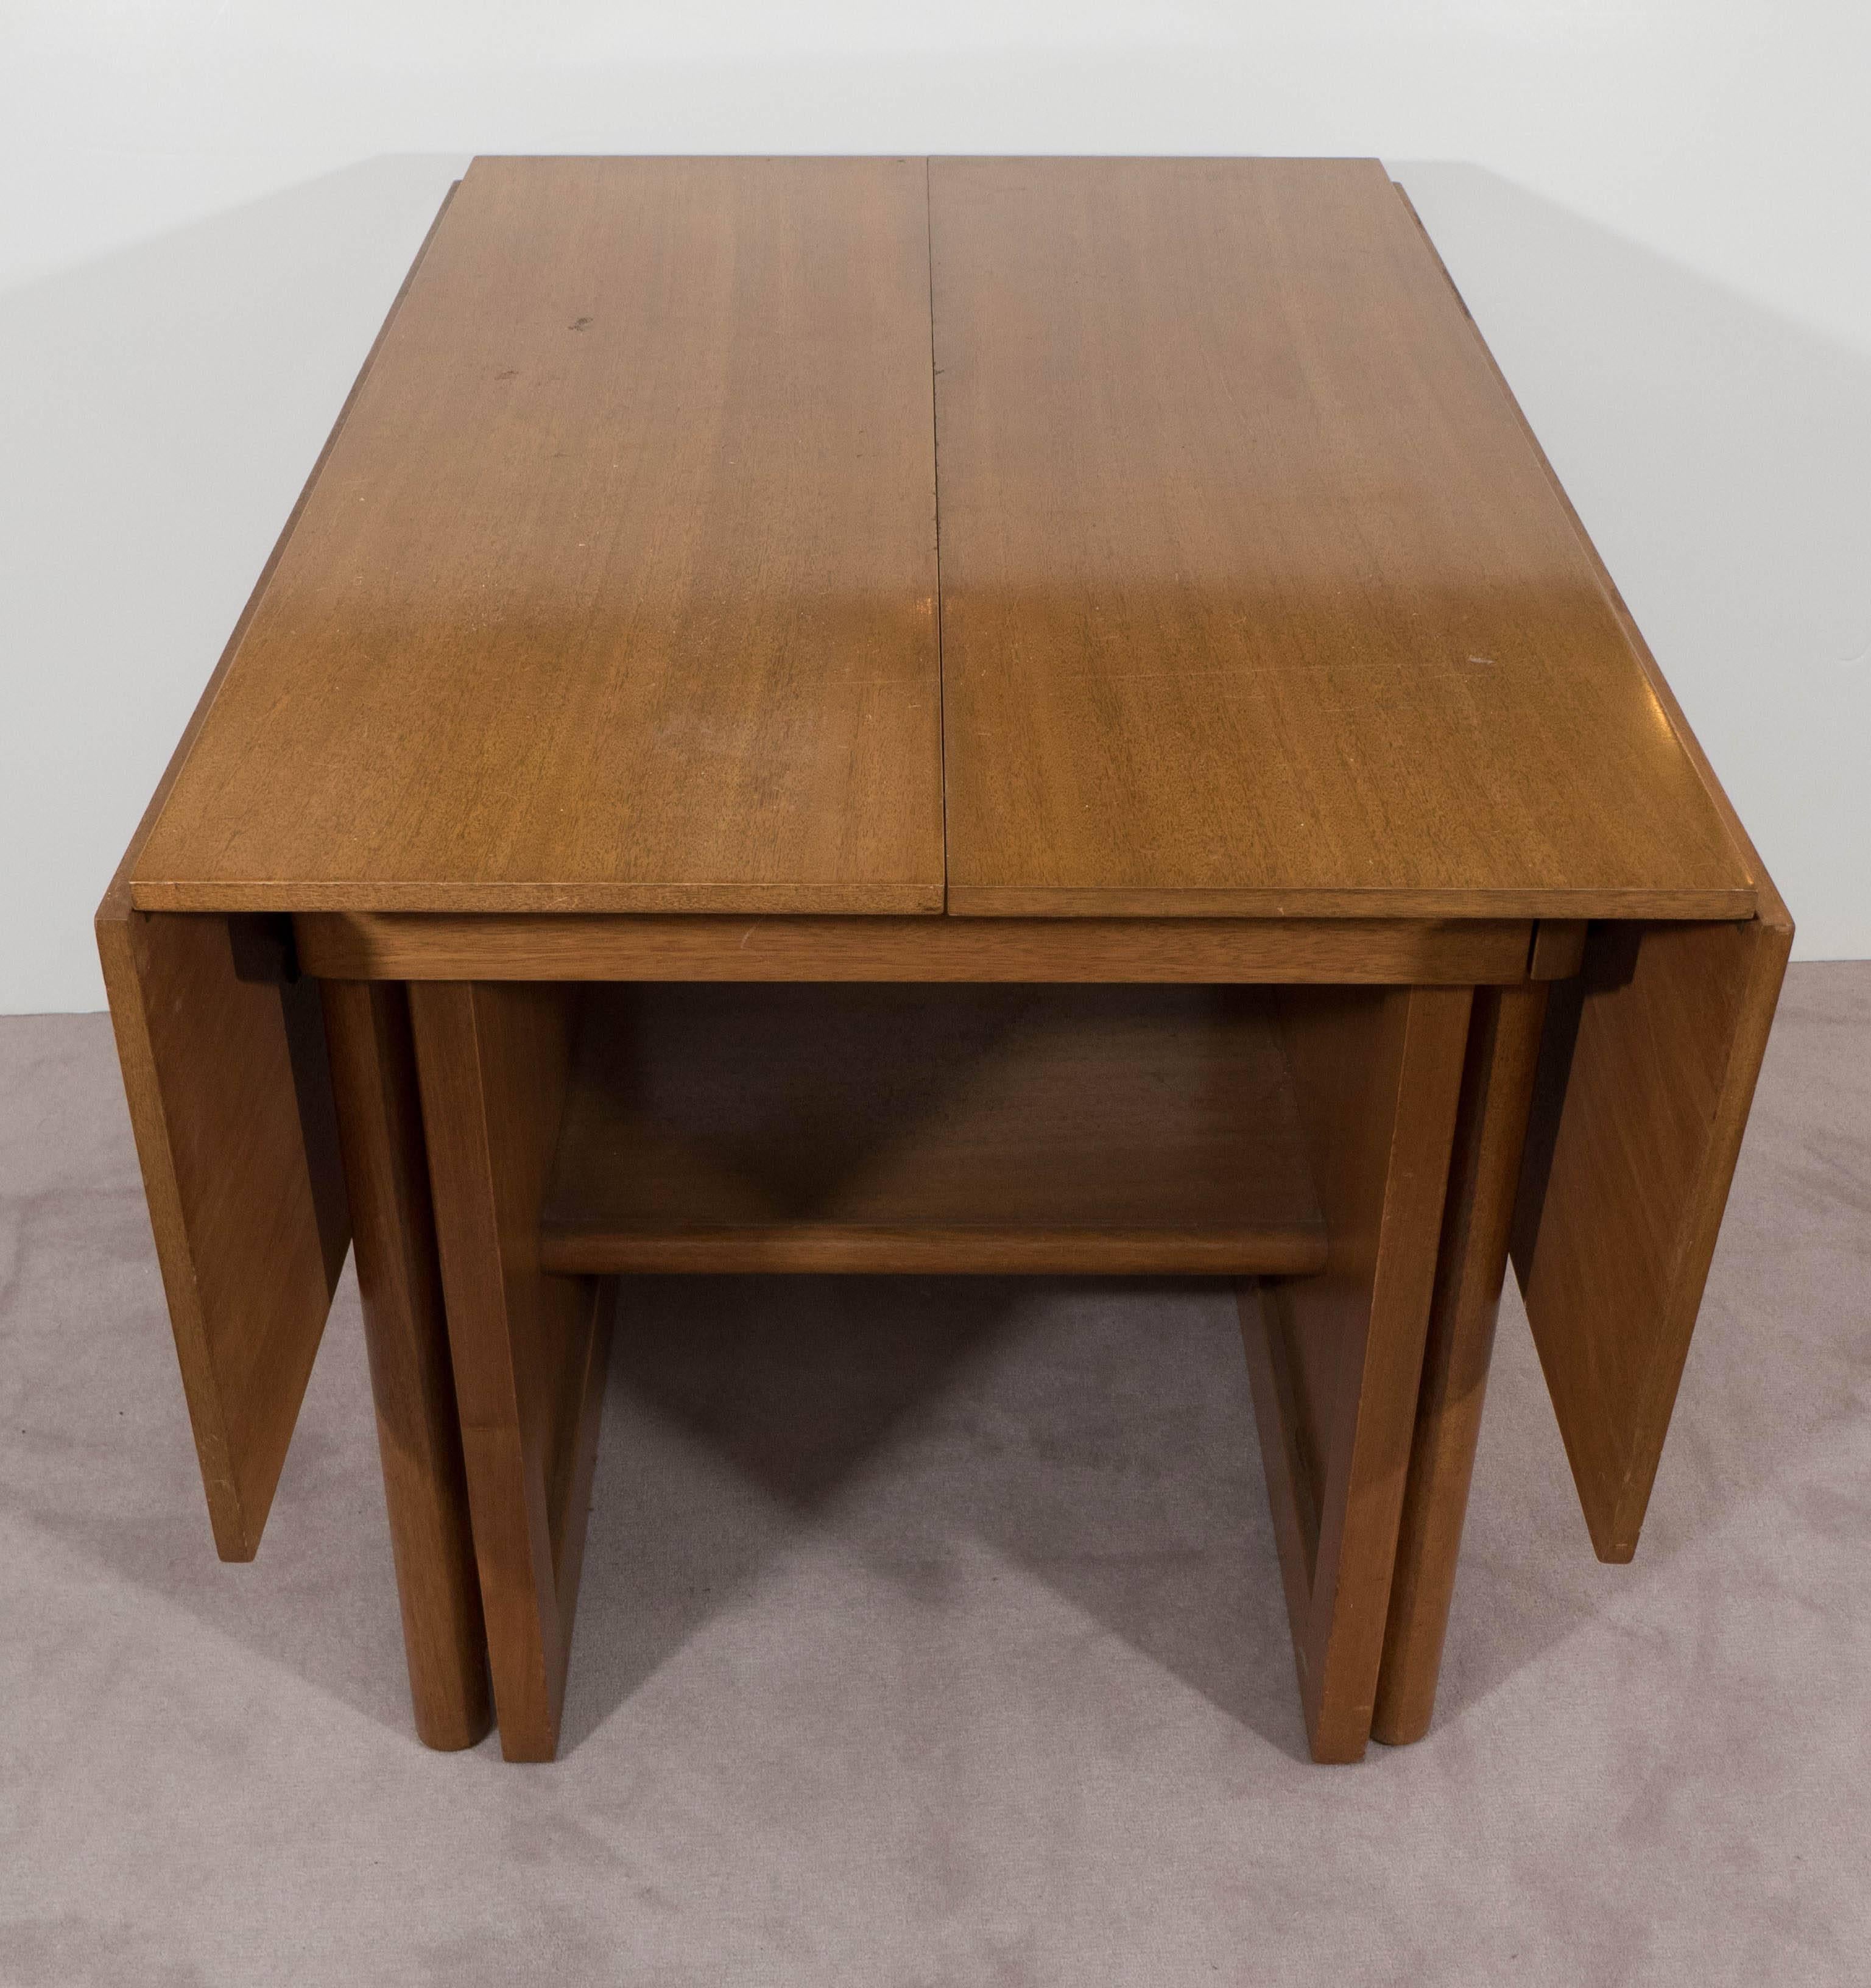 A vintage extension dining table, produced by Dunbar, circa 1940s and designed by Edward Wormley (Model 4576), which includes drop-leaf sides and five leaves. At full length, this piece extends 126". This piece is in overall very good